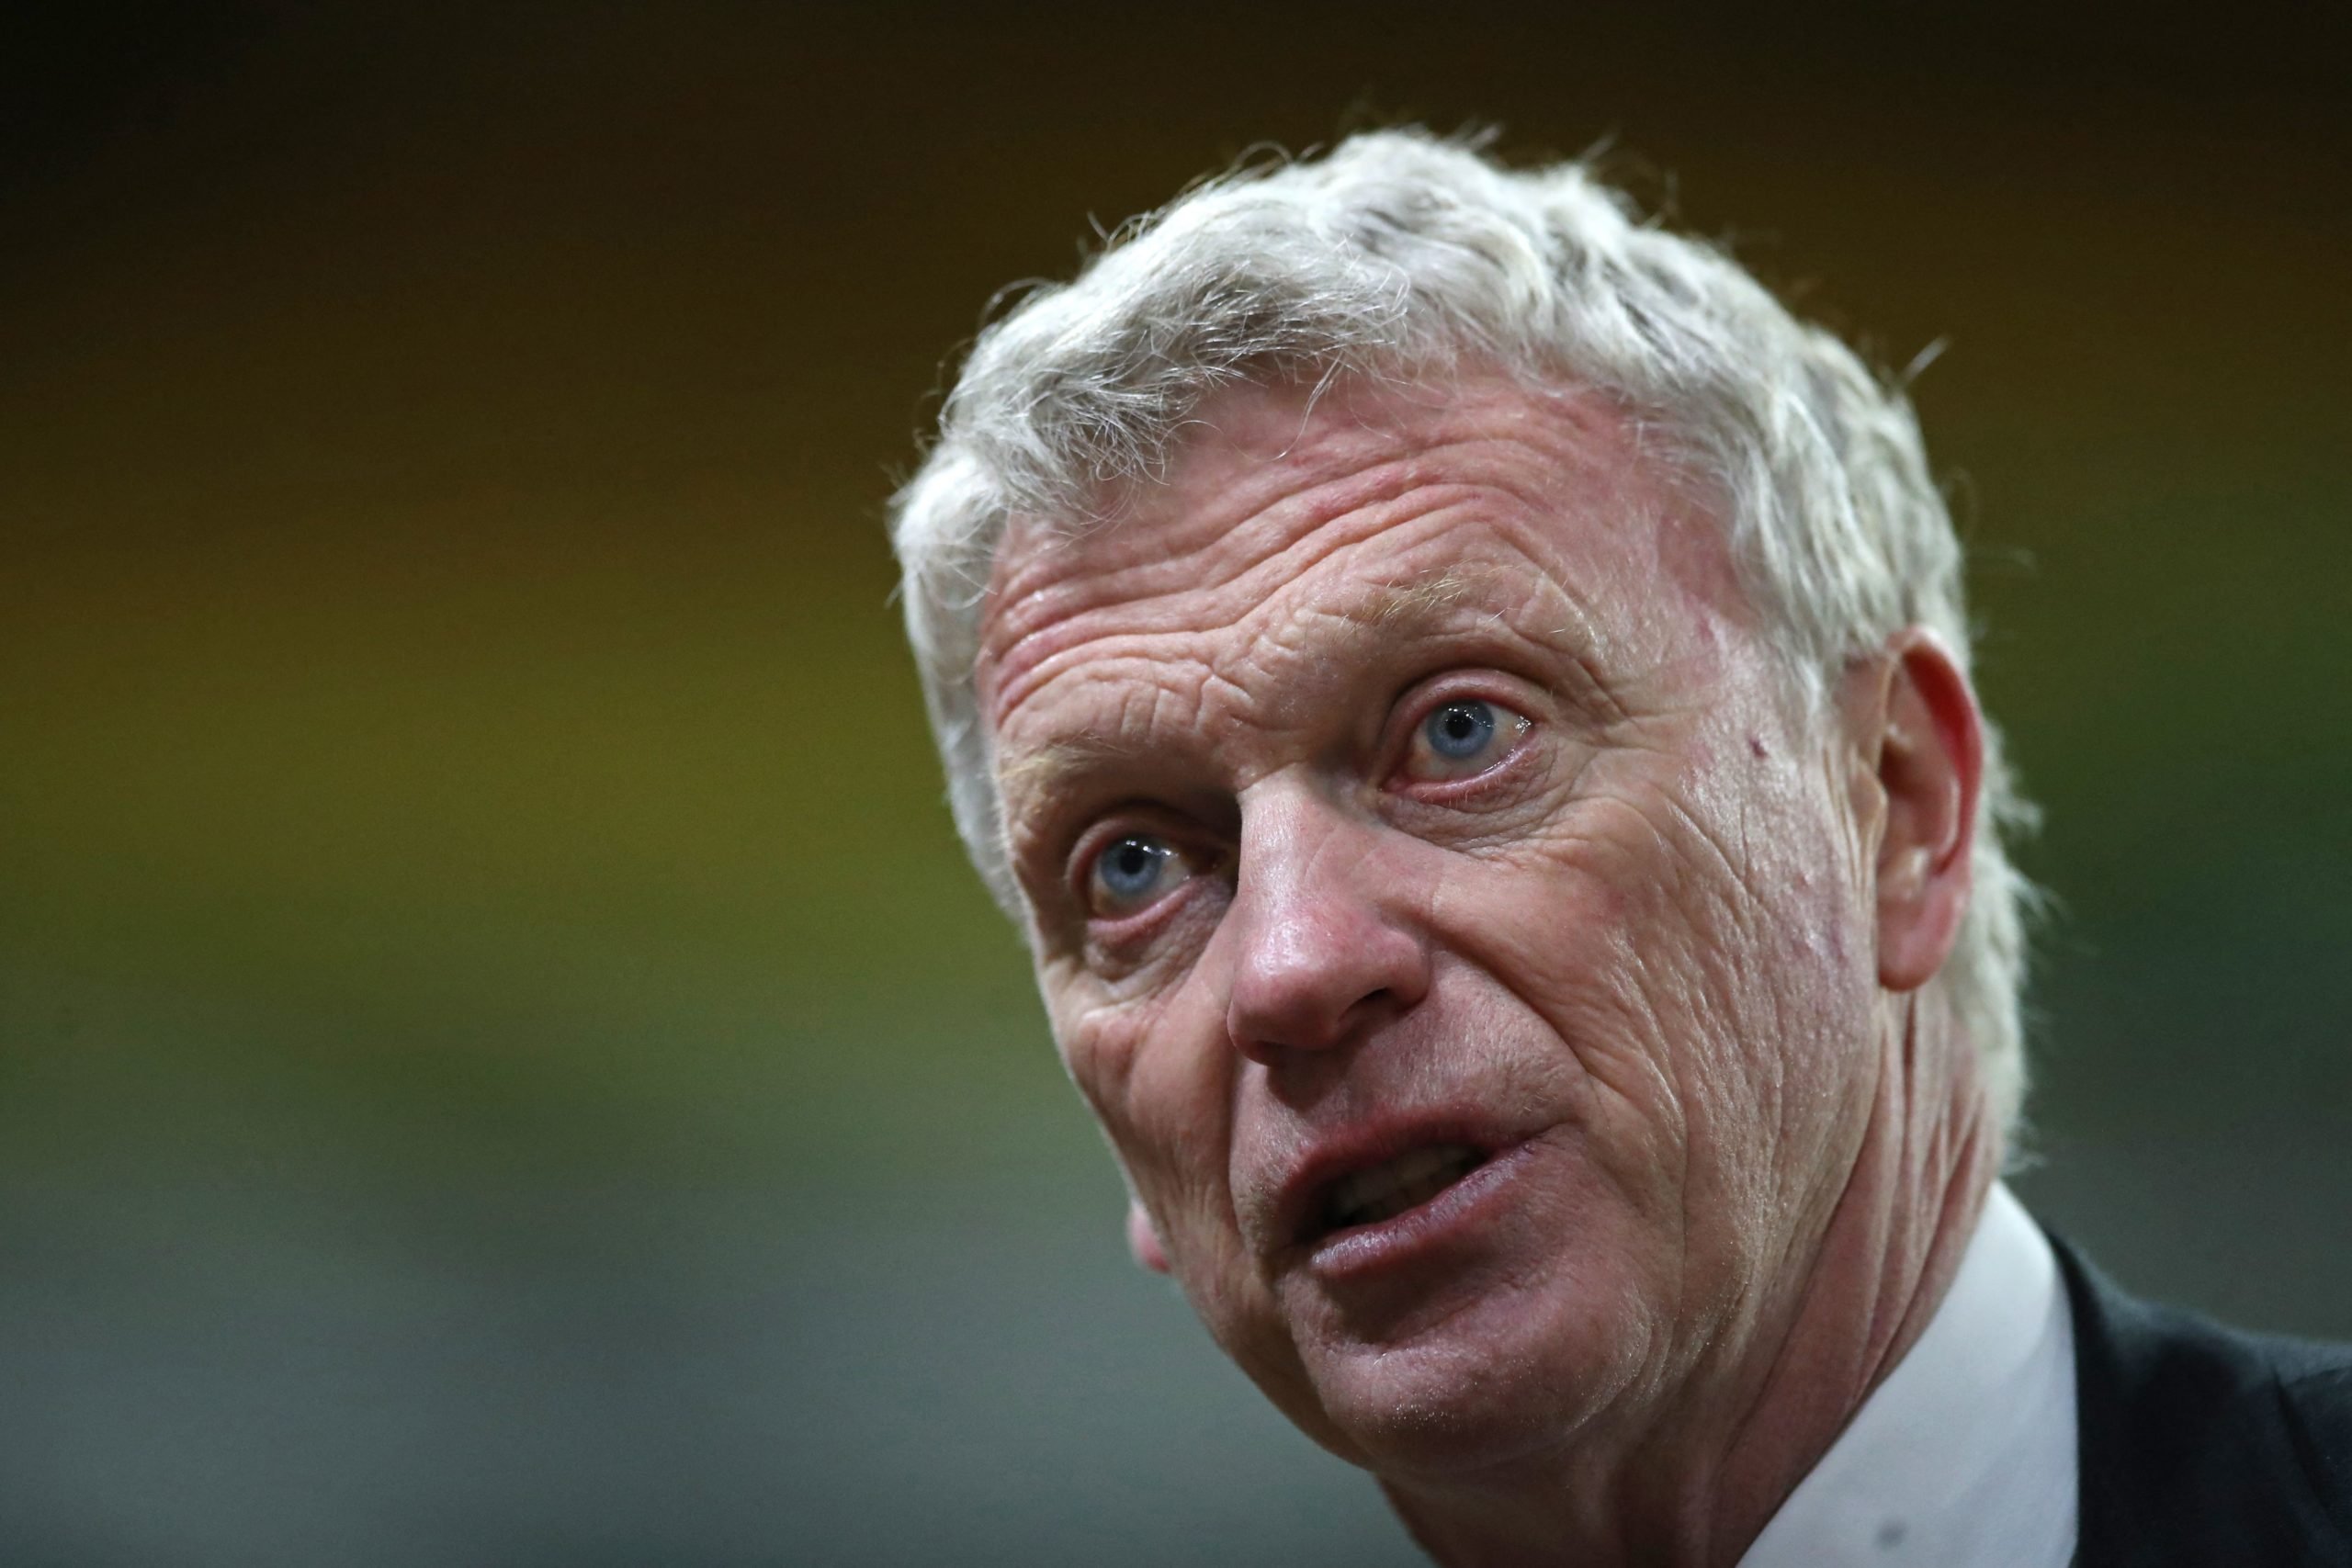 David Moyes transfer window update: West Ham boss says he may go big in the summer instead